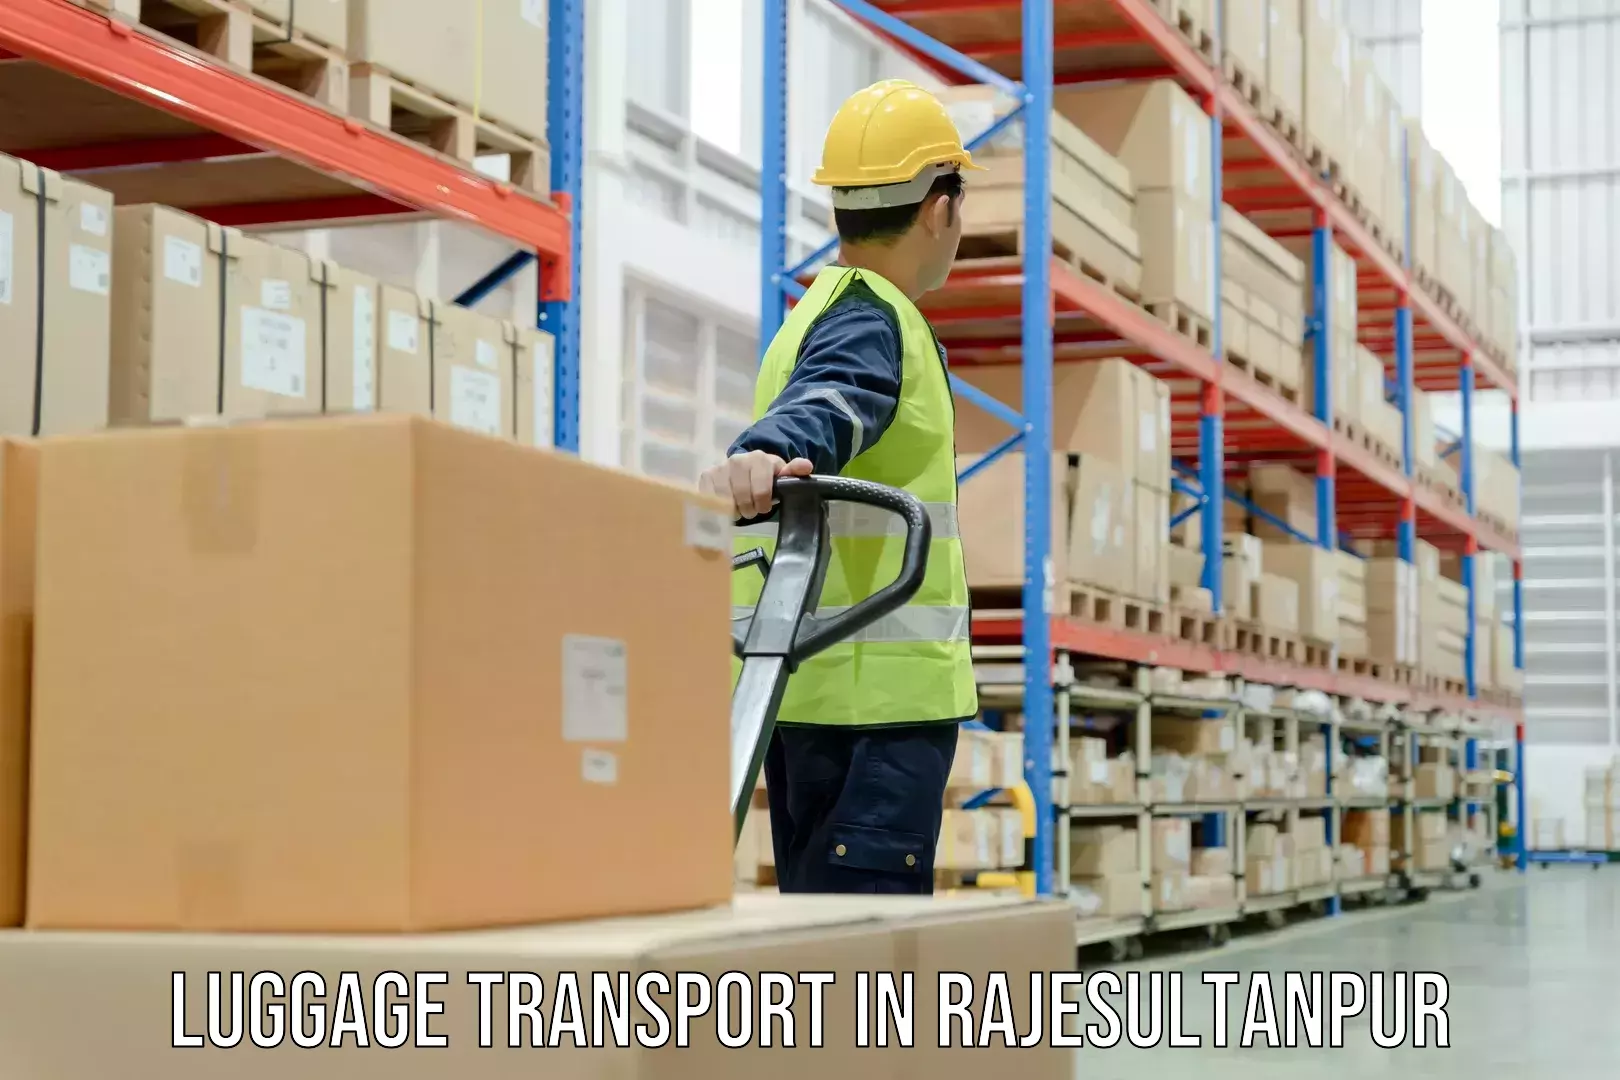 Luggage delivery logistics in Rajesultanpur